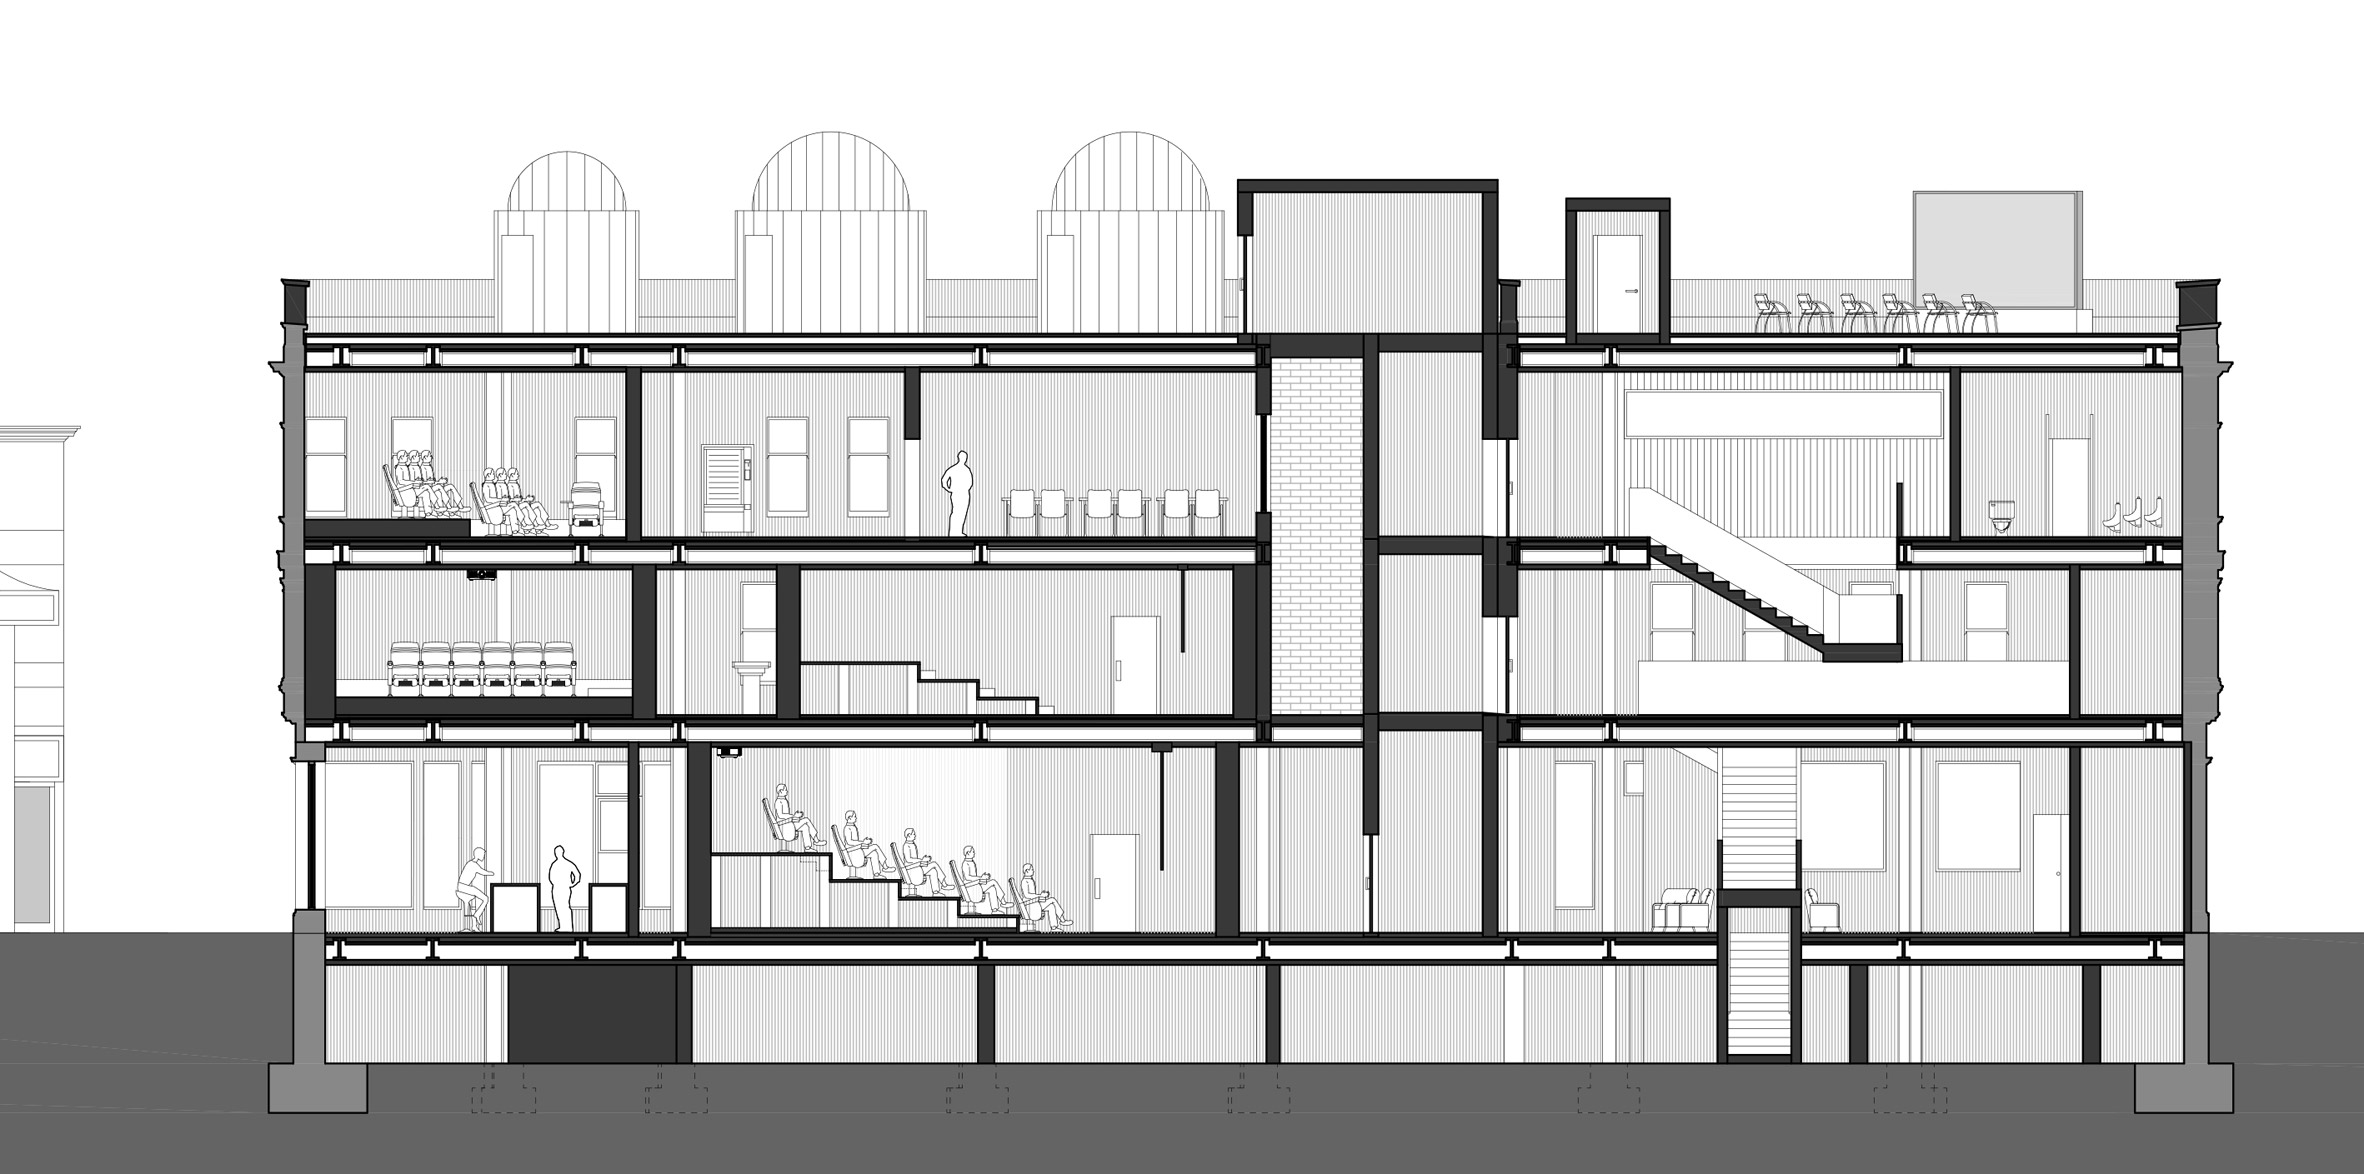 Black and white section drawing of a theatre complex by student at Ravensbourne University London